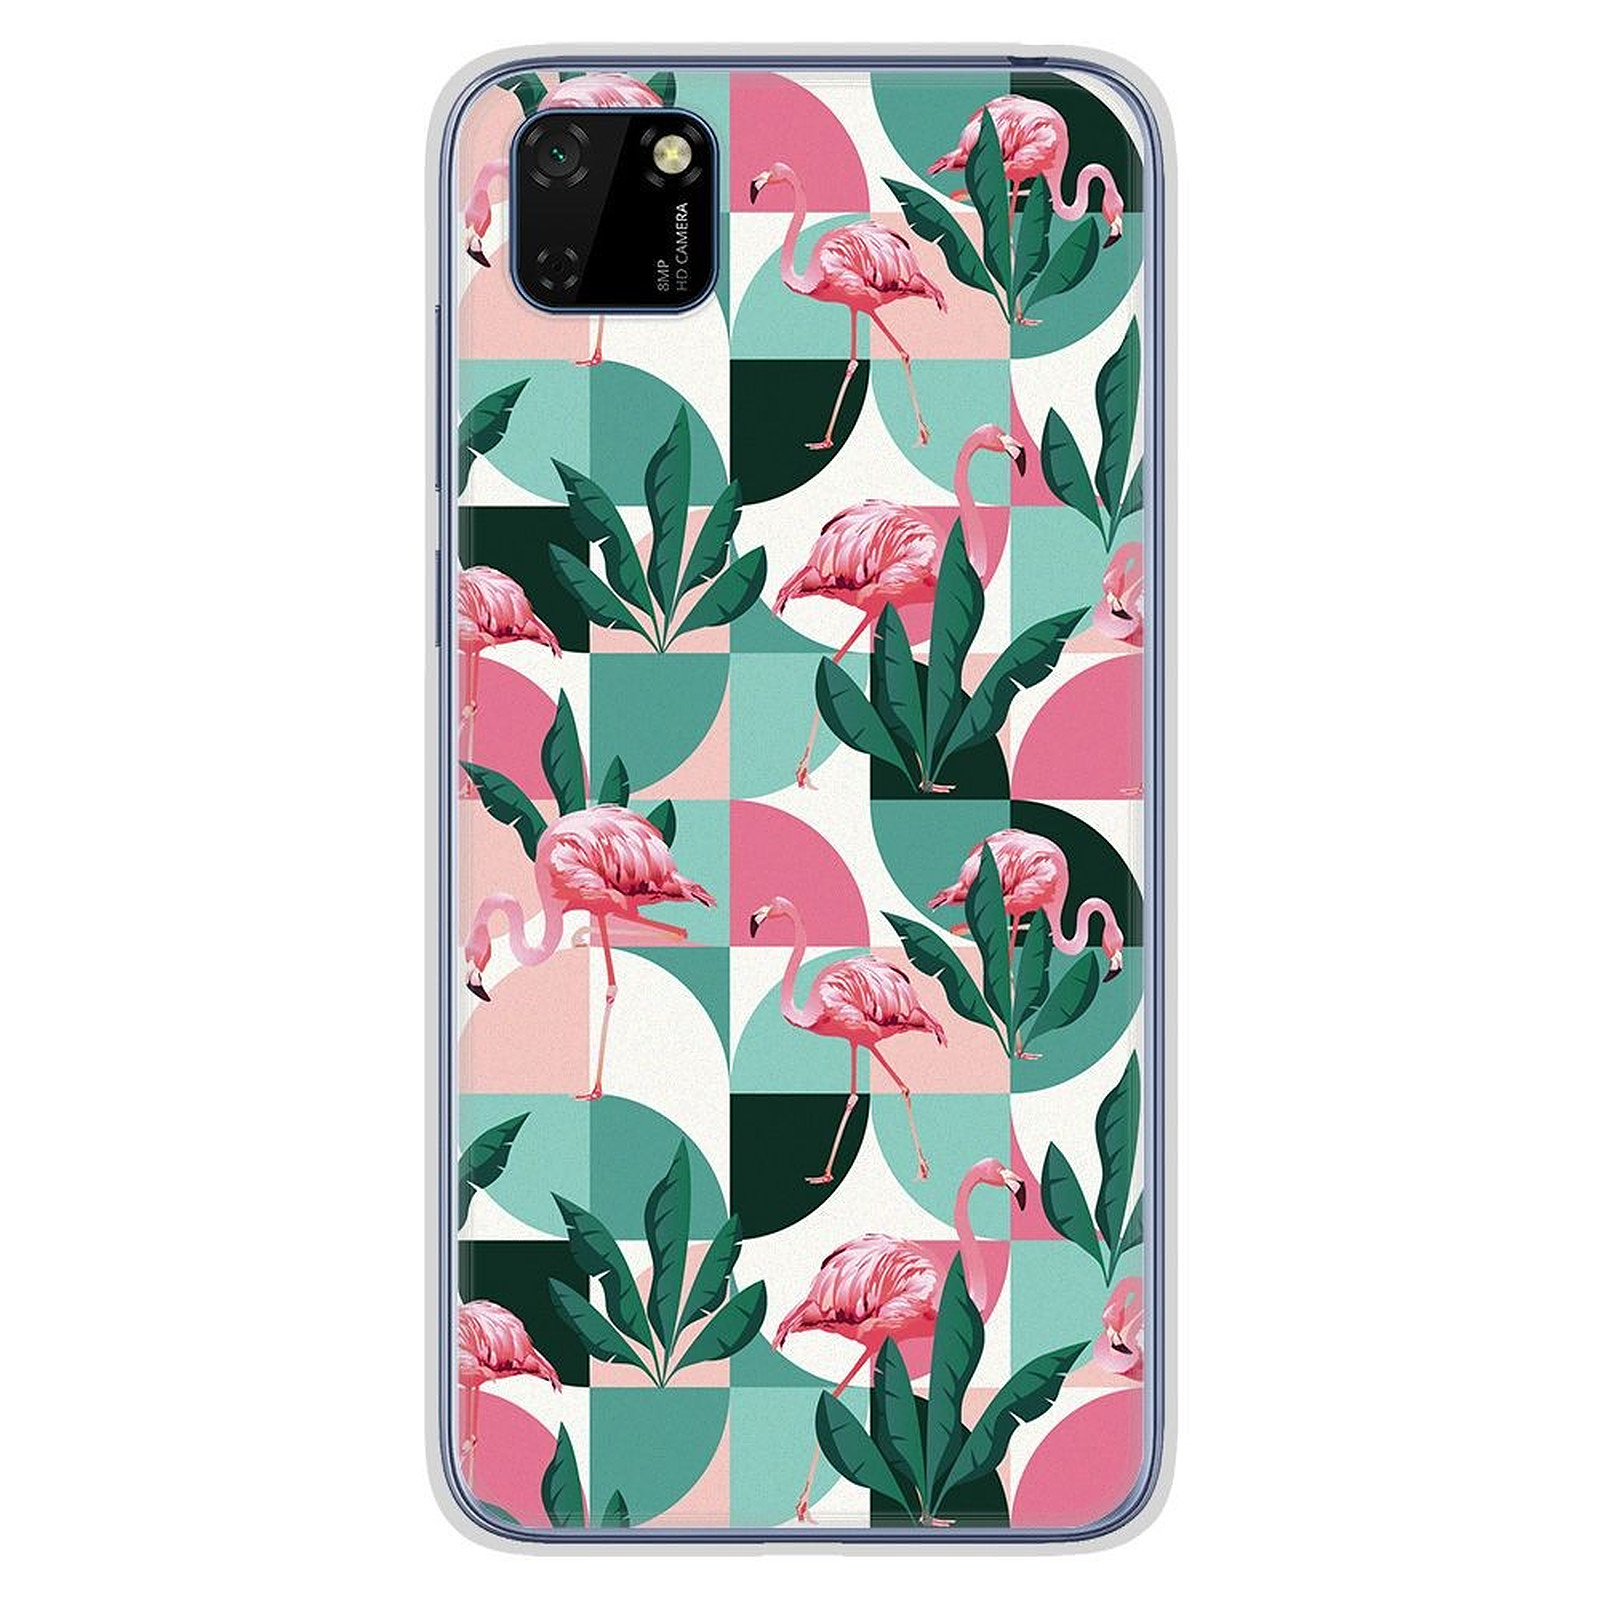 1001 Coques Coque silicone gel Huawei Y5P motif Flamants Roses ge´ome´trique - Coque telephone 1001Coques